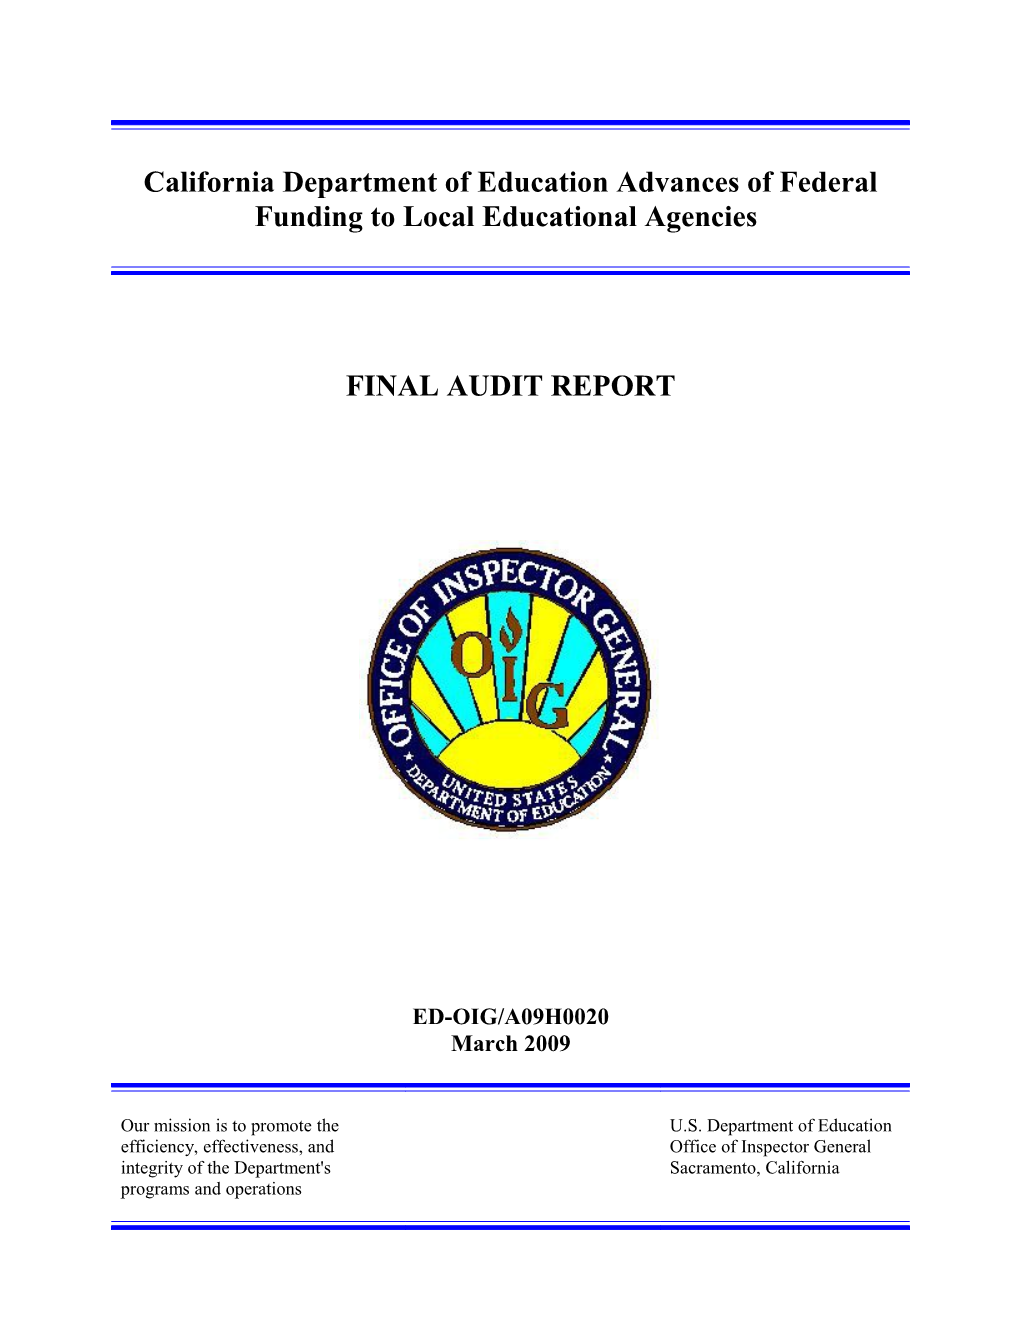 Audit A09H0020 - California Department of Education Advances of Federal Funding to Local